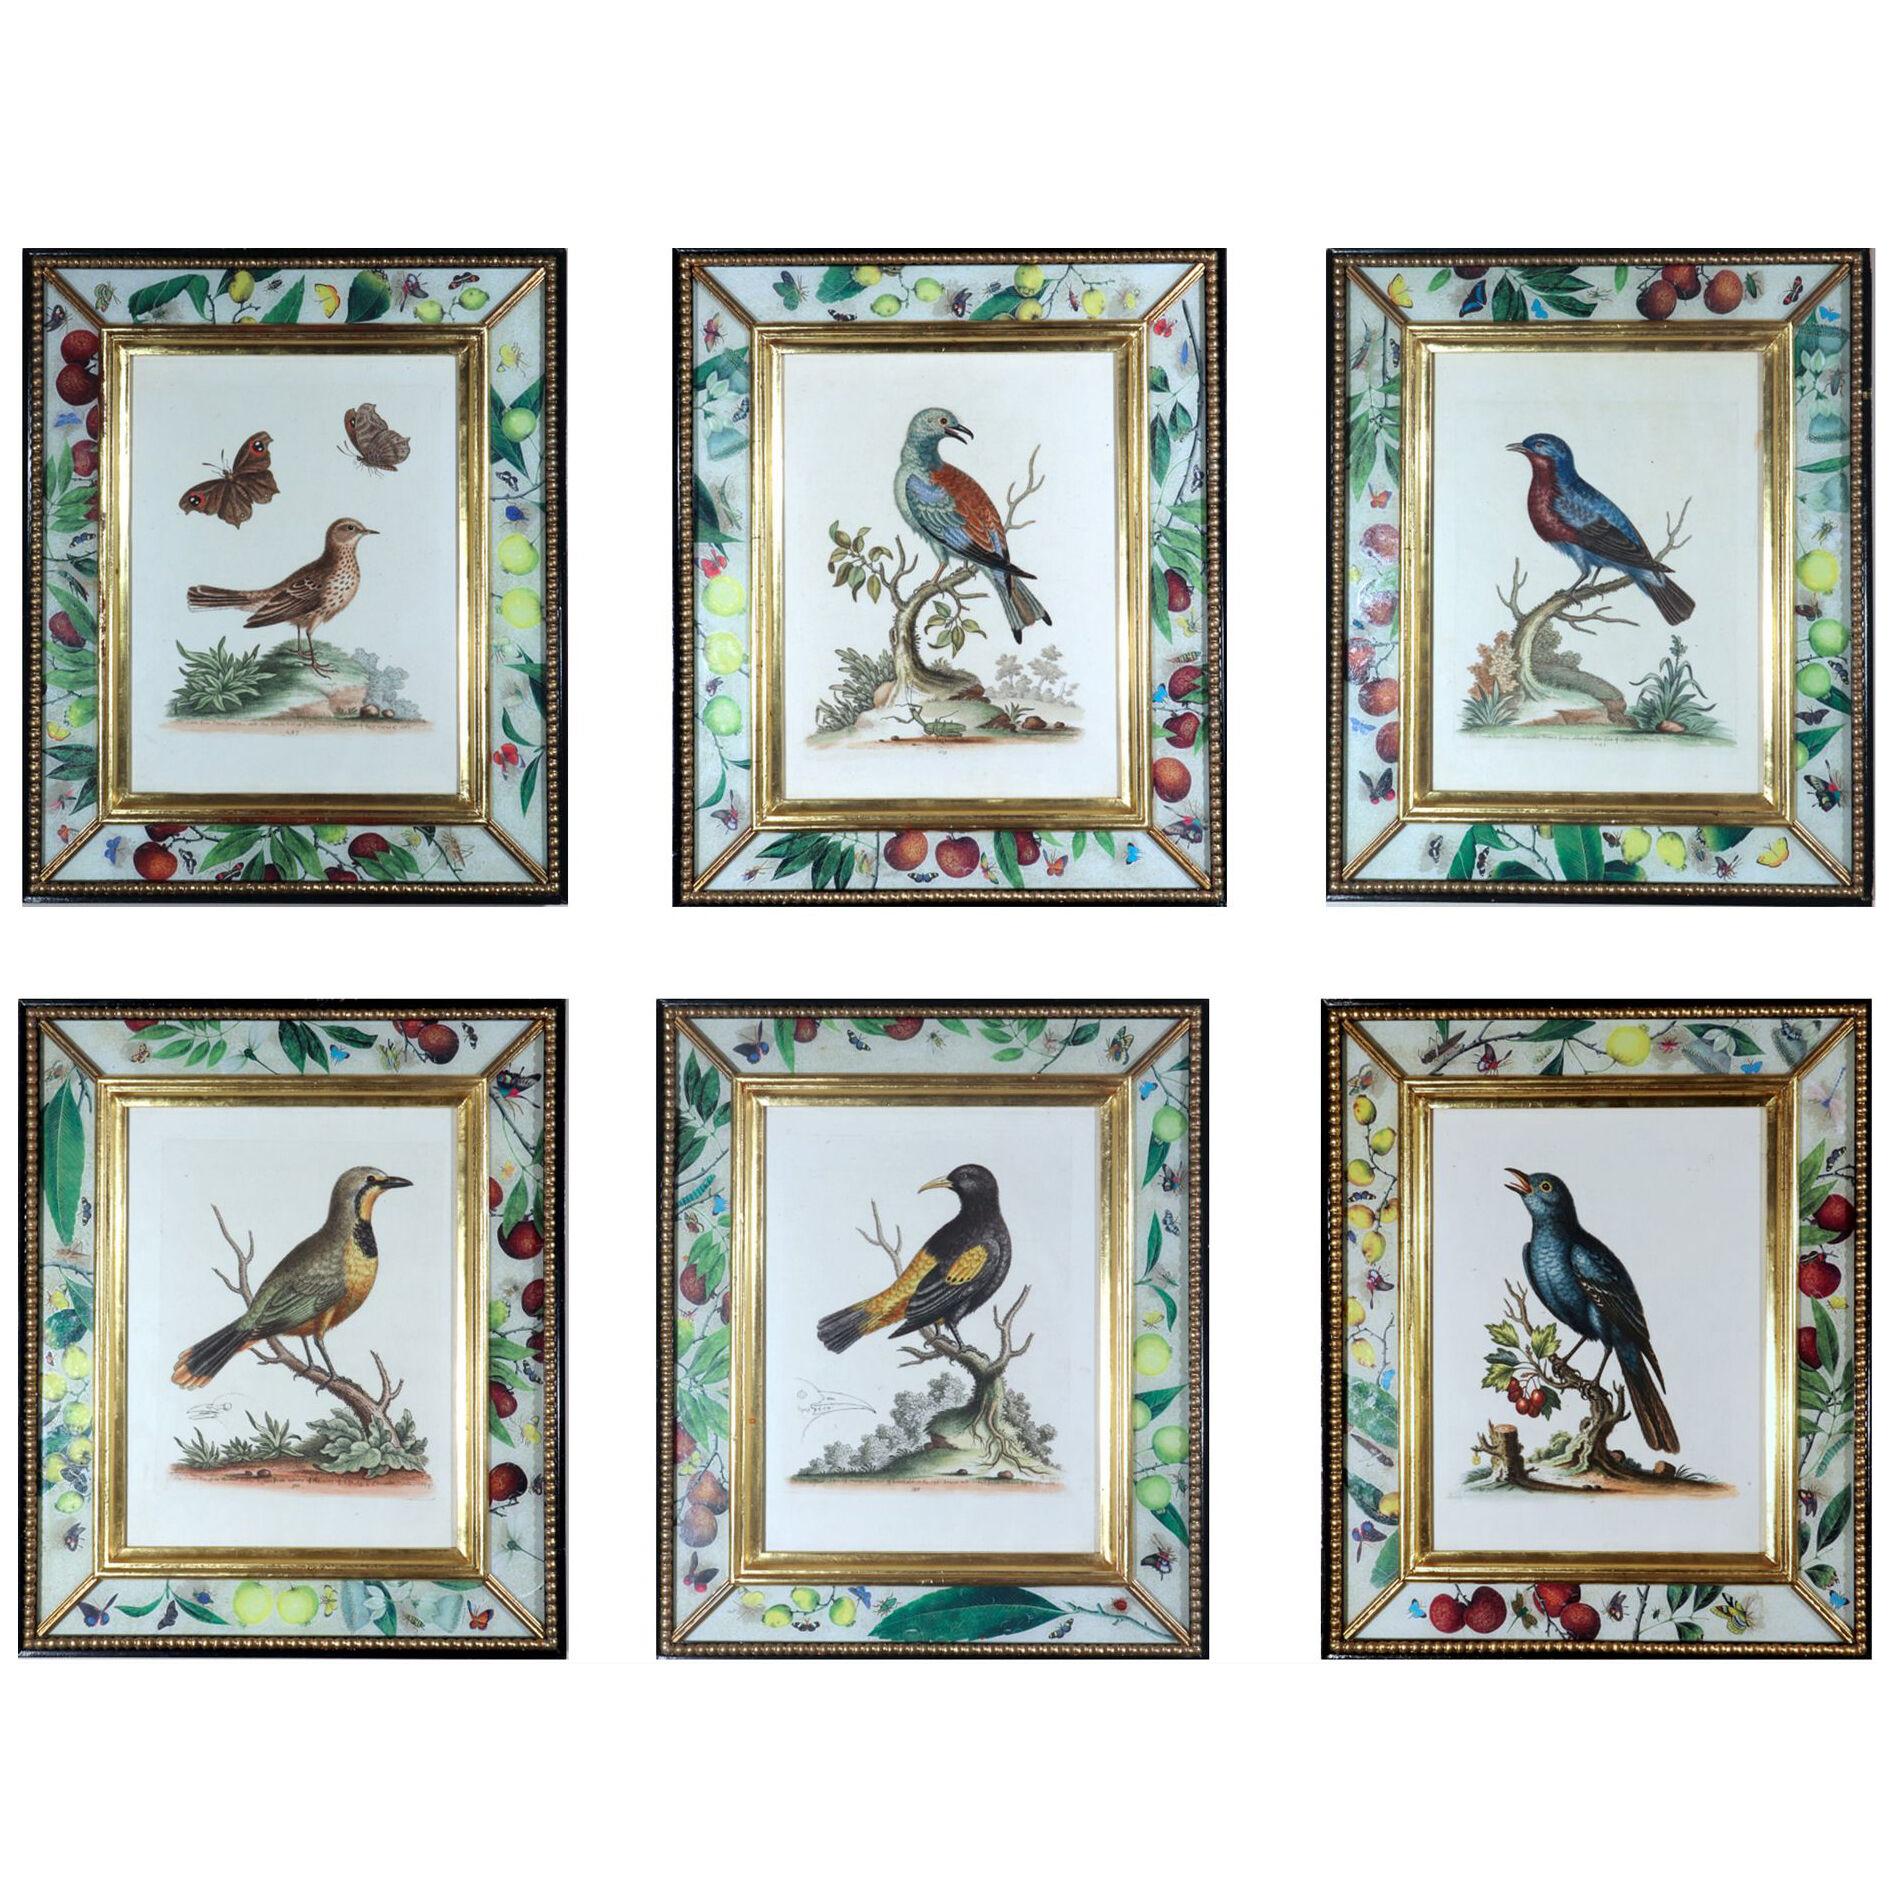 George Edwards Engravings of Birds Within Decoupage Frames- A Set of Six